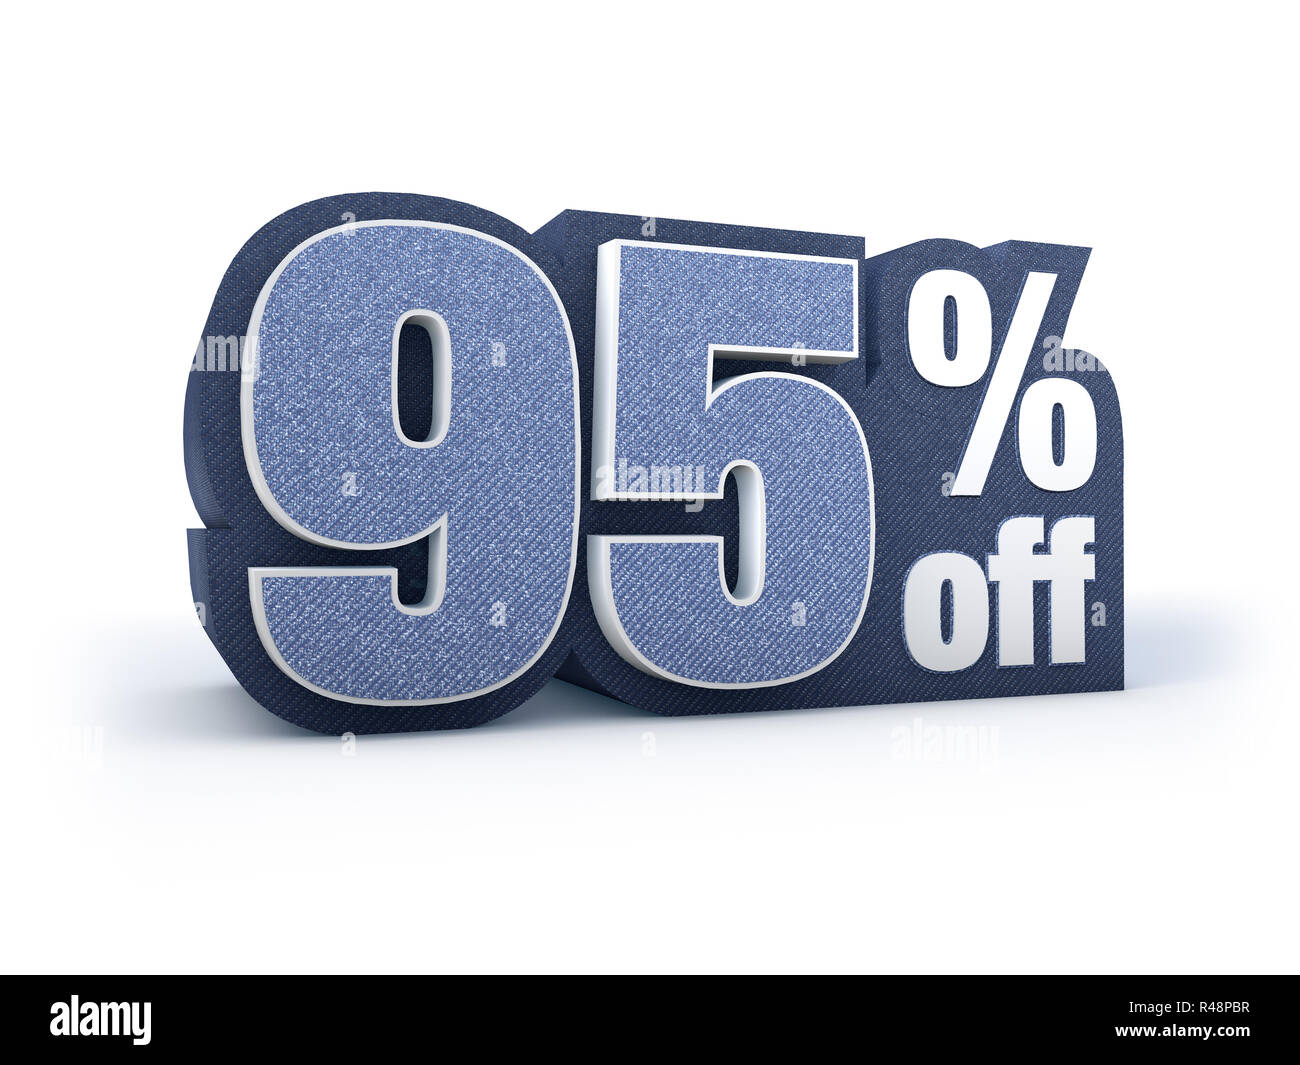 95 percent off denim styled discount price sign Stock Photo